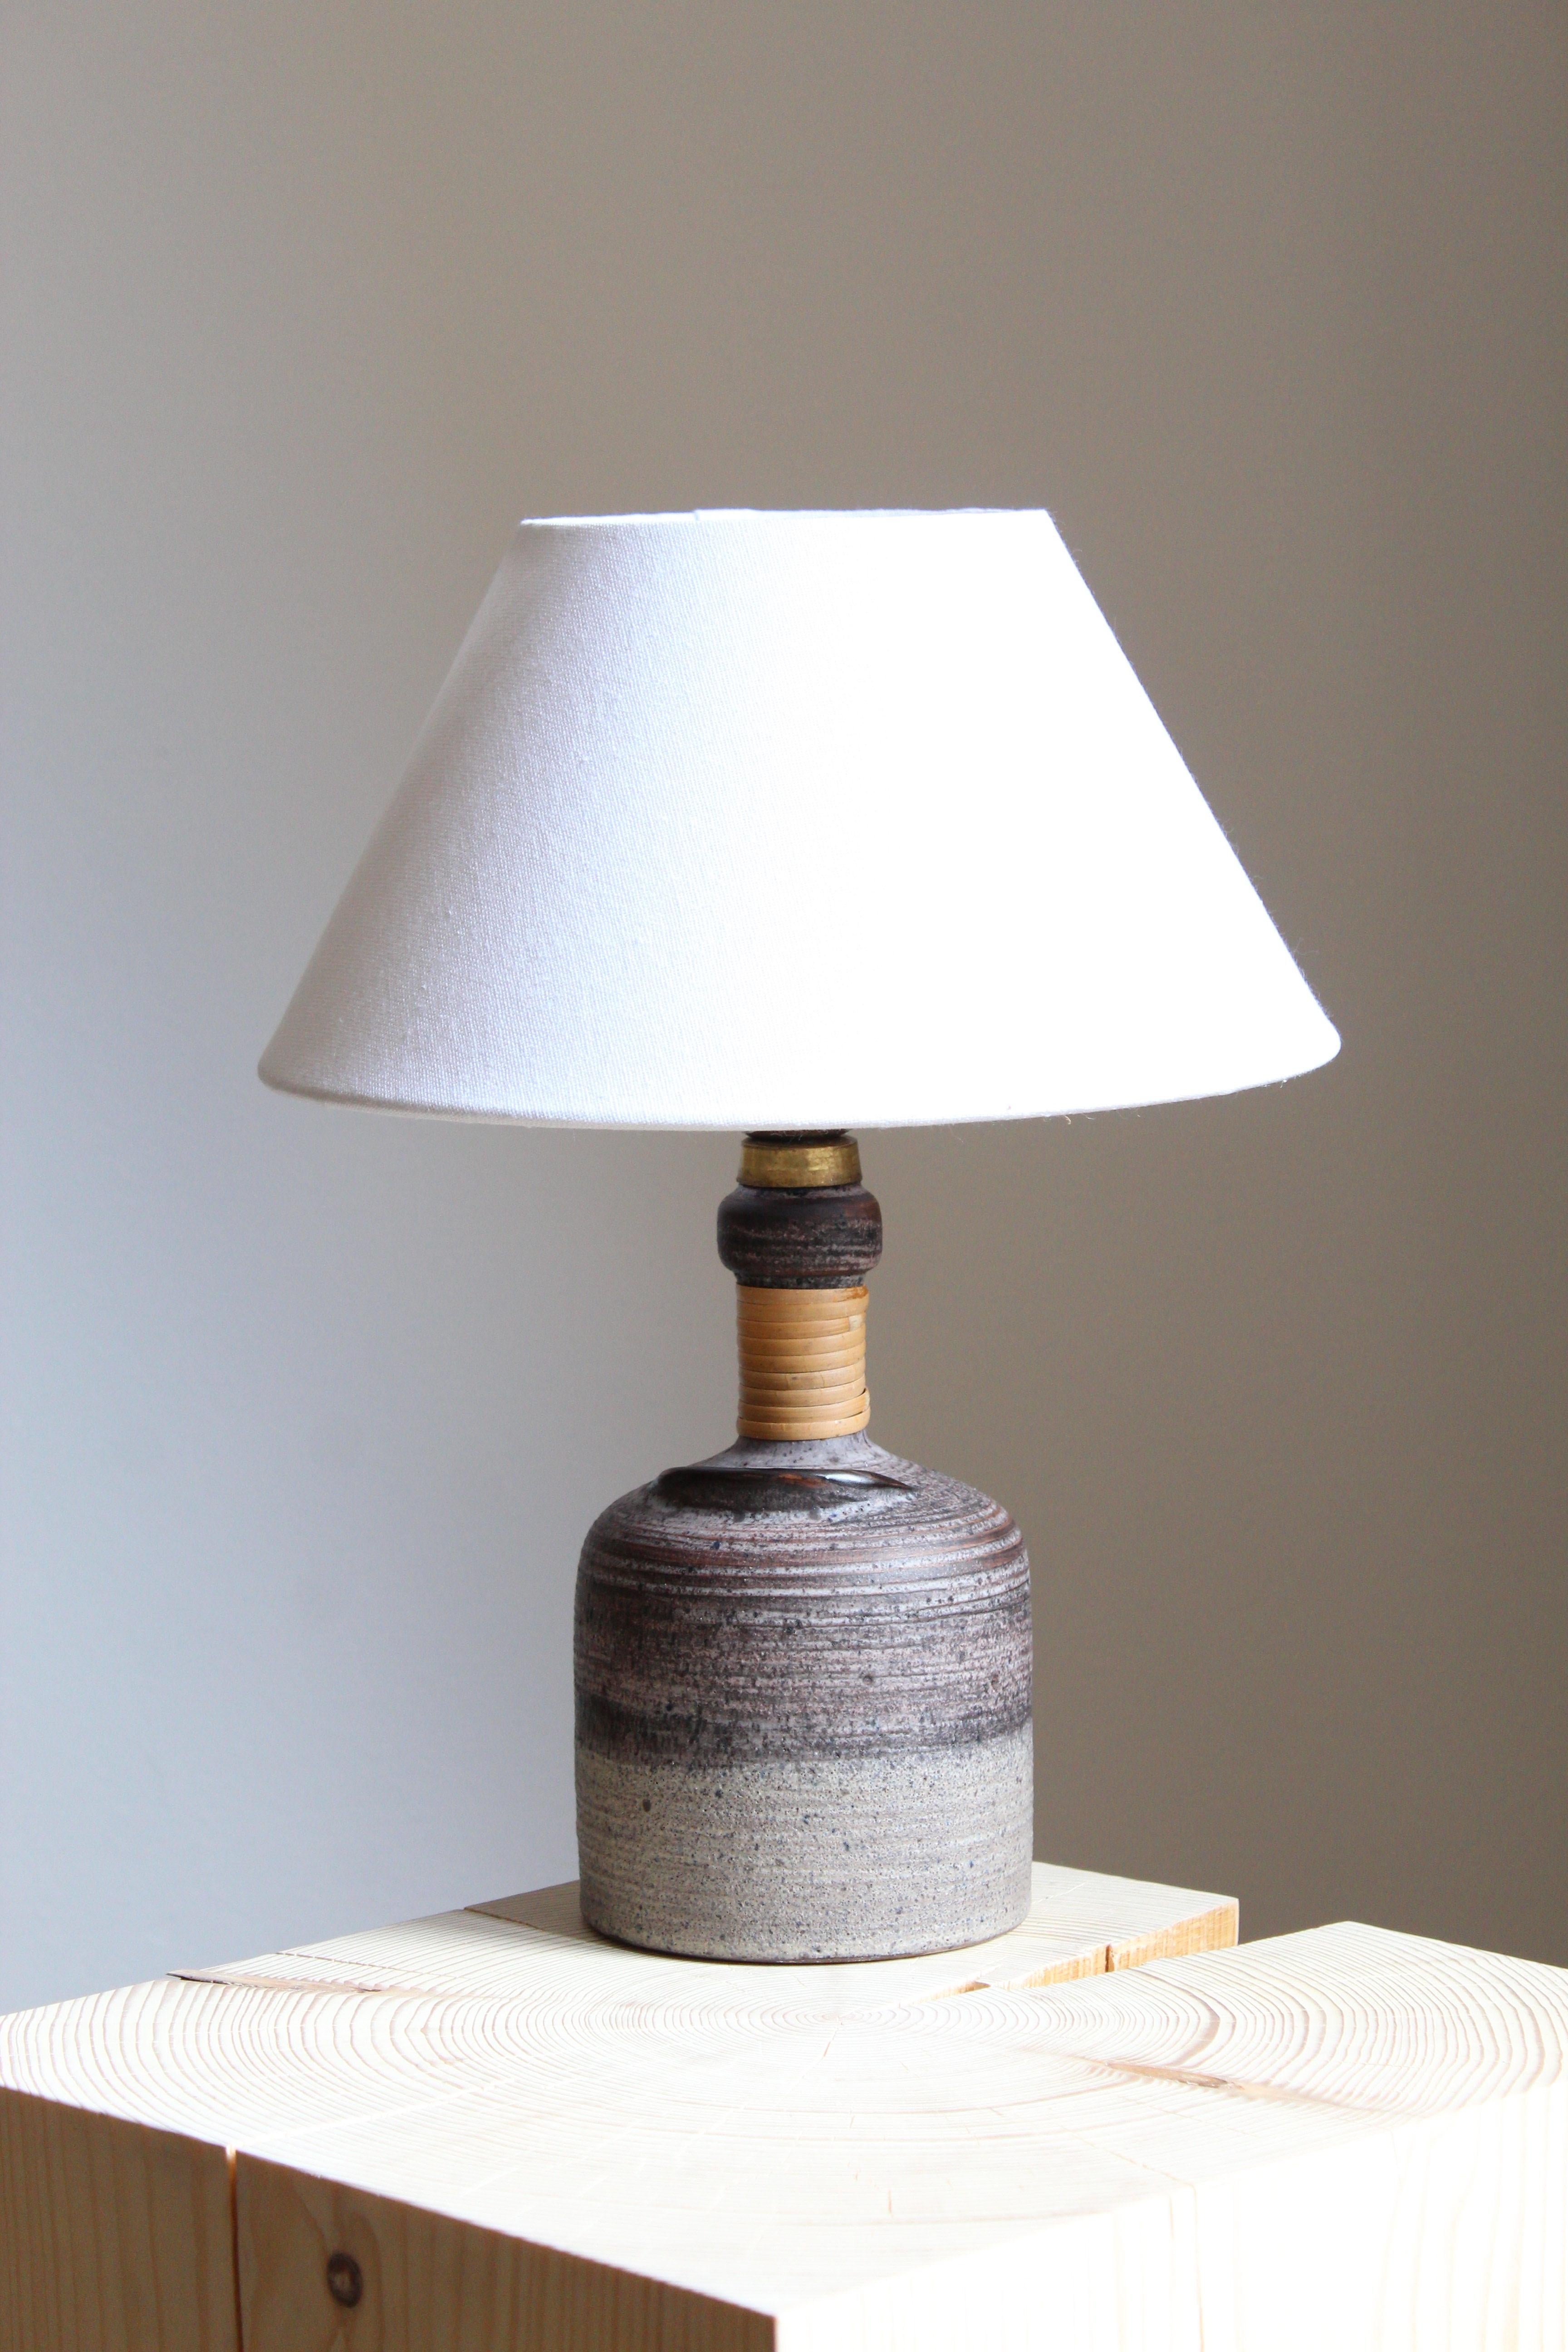 A table lamp designed by Thomas Hellström, produced by Nittsjö, Sweden, c. 1960s.

Features subtle incised decor and a sculptural detail as well as original cane wrapping.

Stated dimensions exclude lampshade. Height includes socket. Sold without